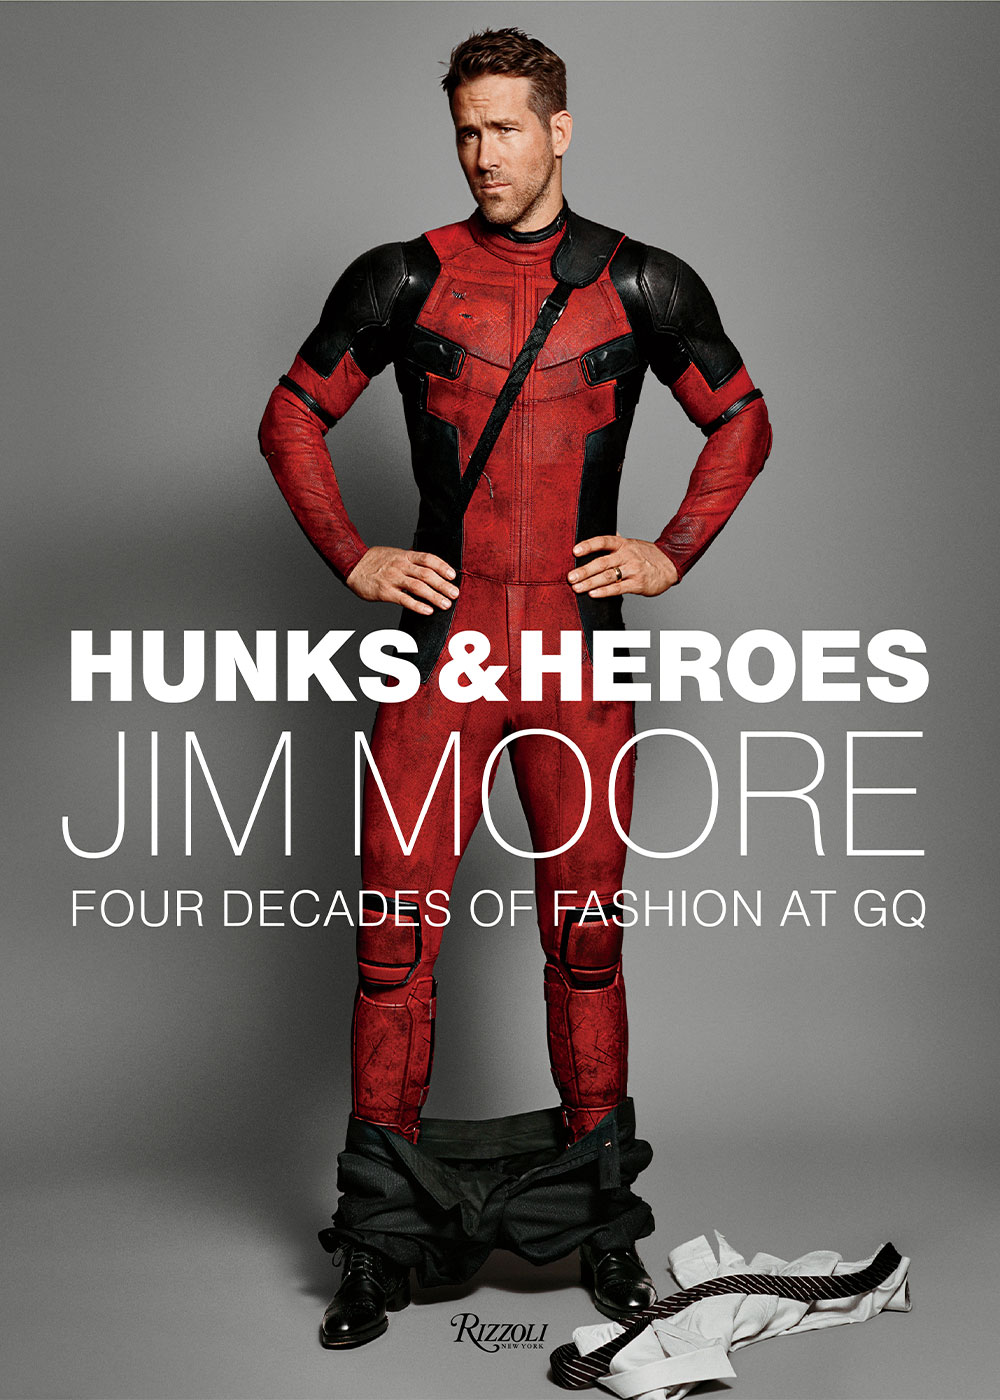 Jim Moore's book Hunks & Heroes Four Decades of Fashion at GQ Cover Ryan Reynolds